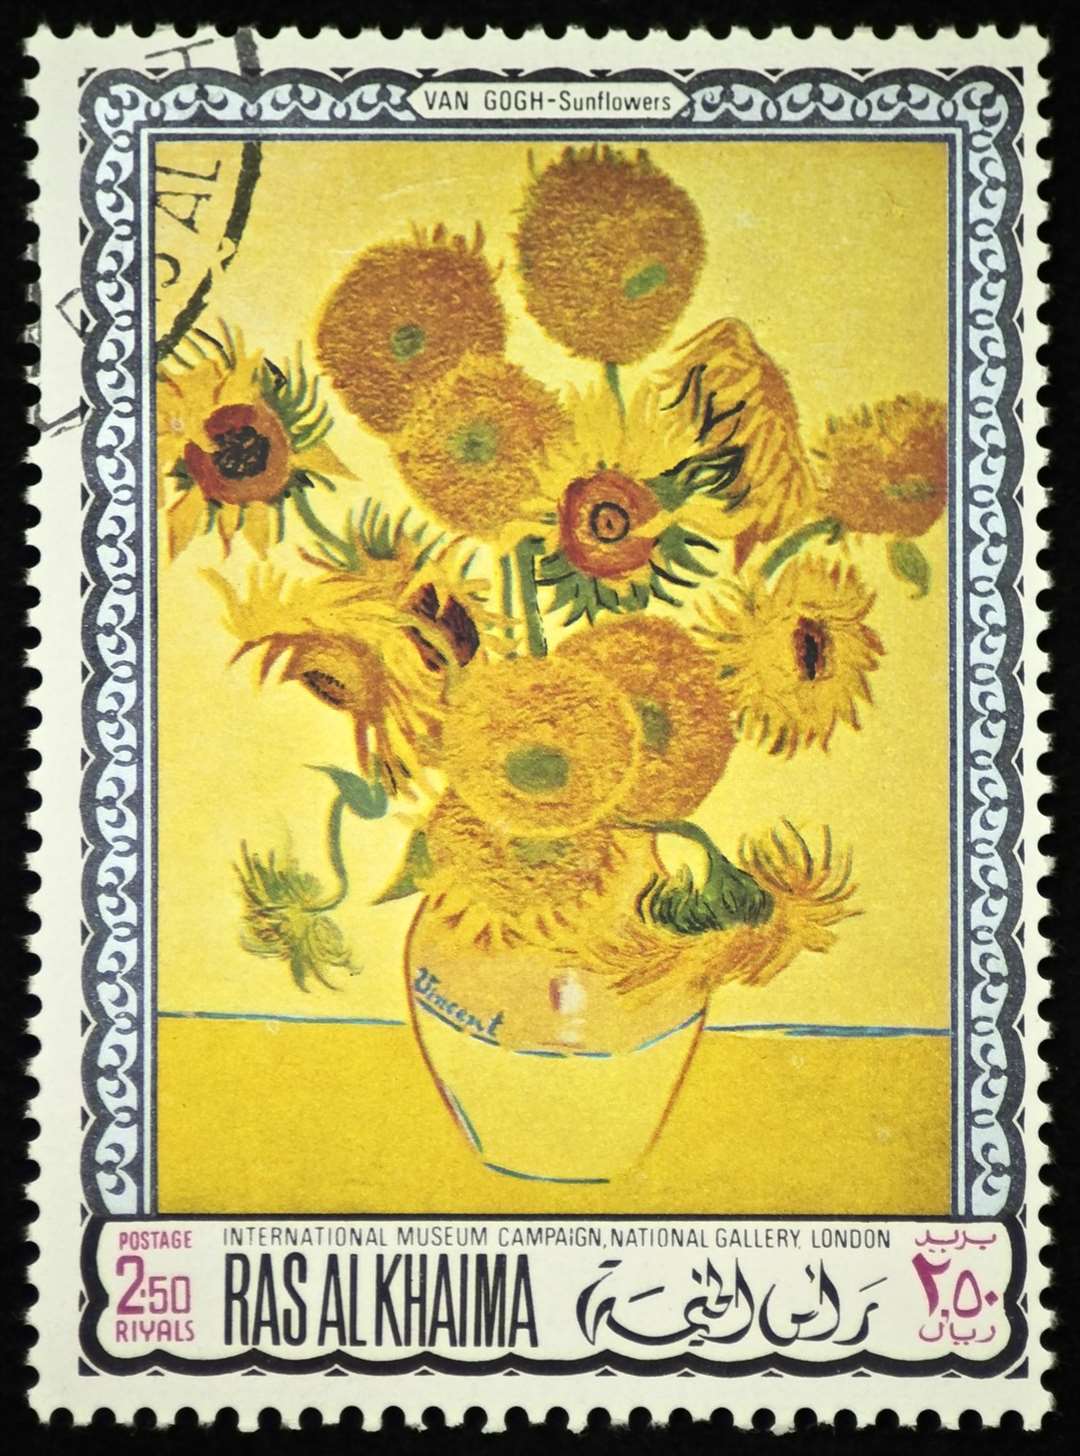 Vincent Van Gogh's Sunflowers (pictured in a stamp)